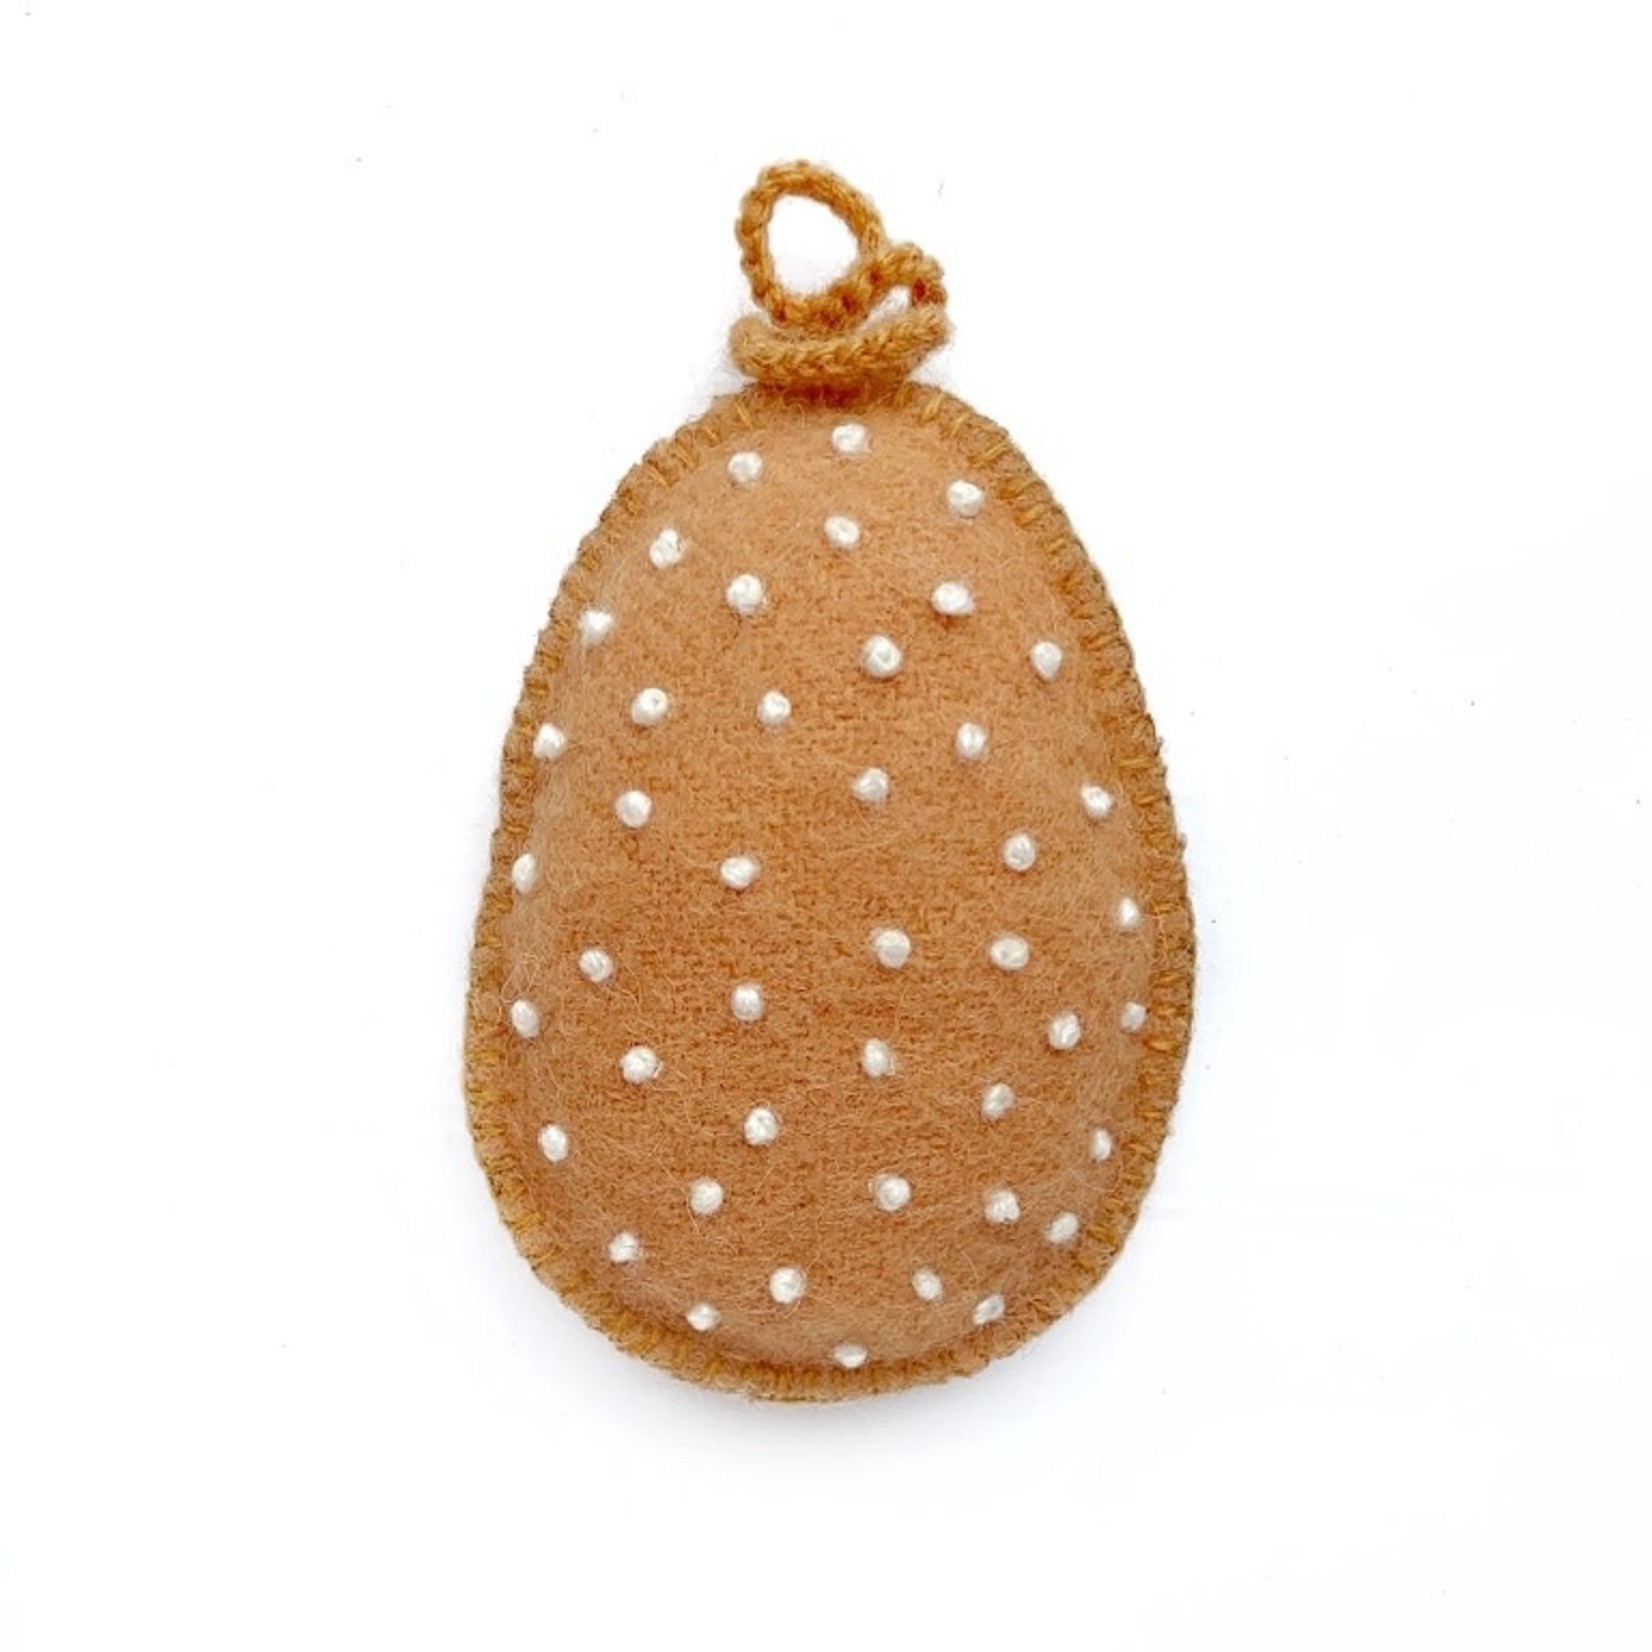 Egg Ornament Embroidered with White Dots